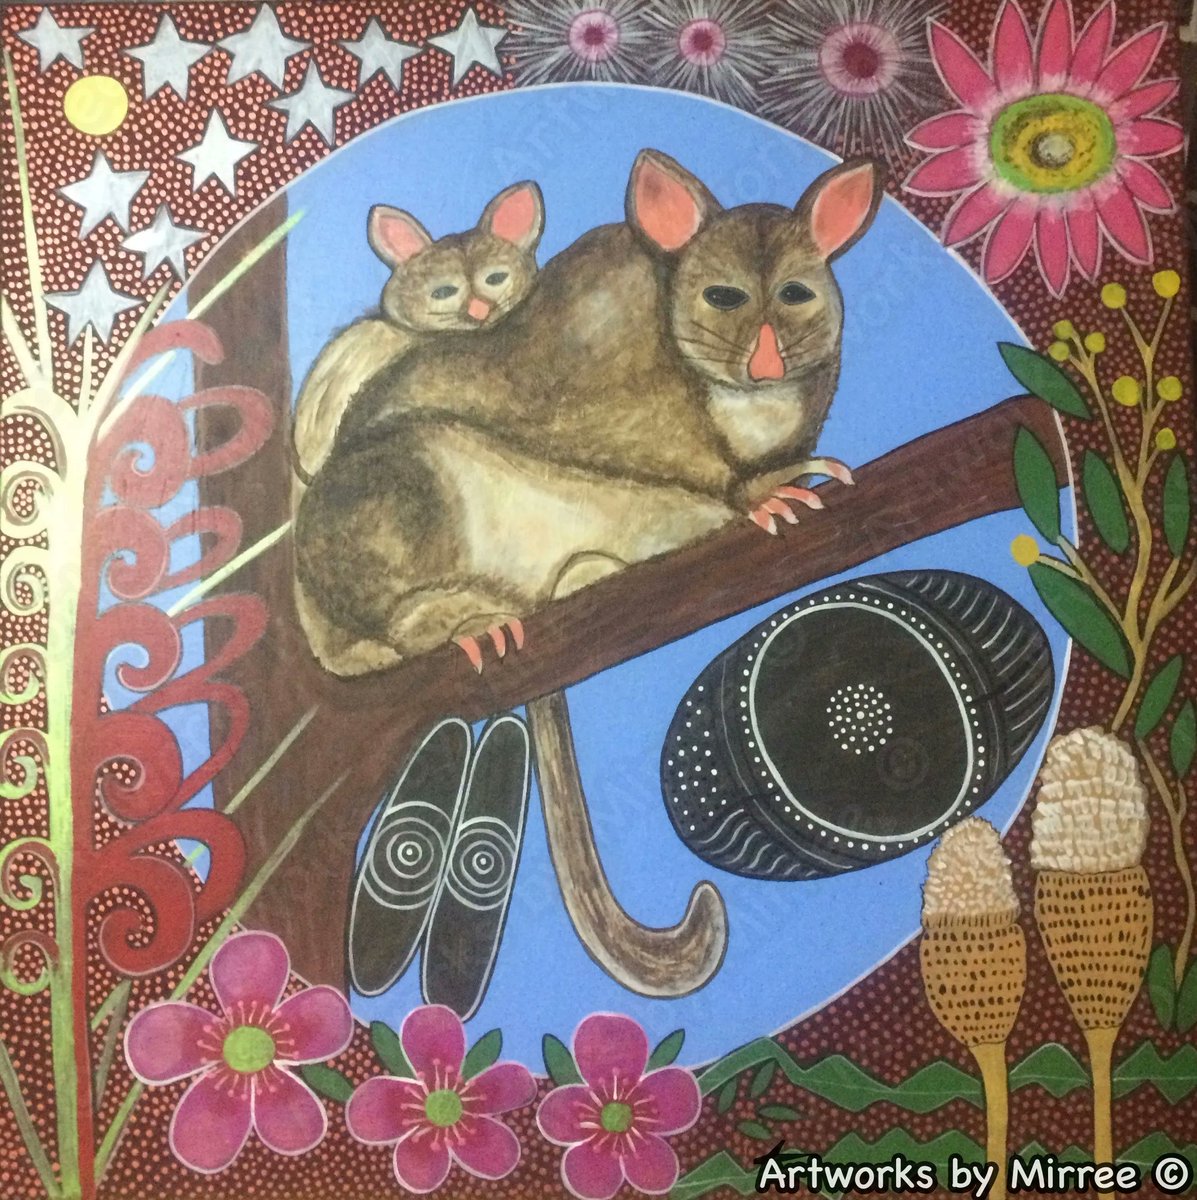 SOMETHING TO BRIGHTEN YOUR DAY🌞🌷💋🌸🌼
POSSUM & BABY represents the pure love and magic a special connection from a mother brings into your heart that creates an everlasting impression.
 bit.ly/POSSUMFLOWERME…

#giftsfromtheheart #mother #art #painting #contemporaryart #possum